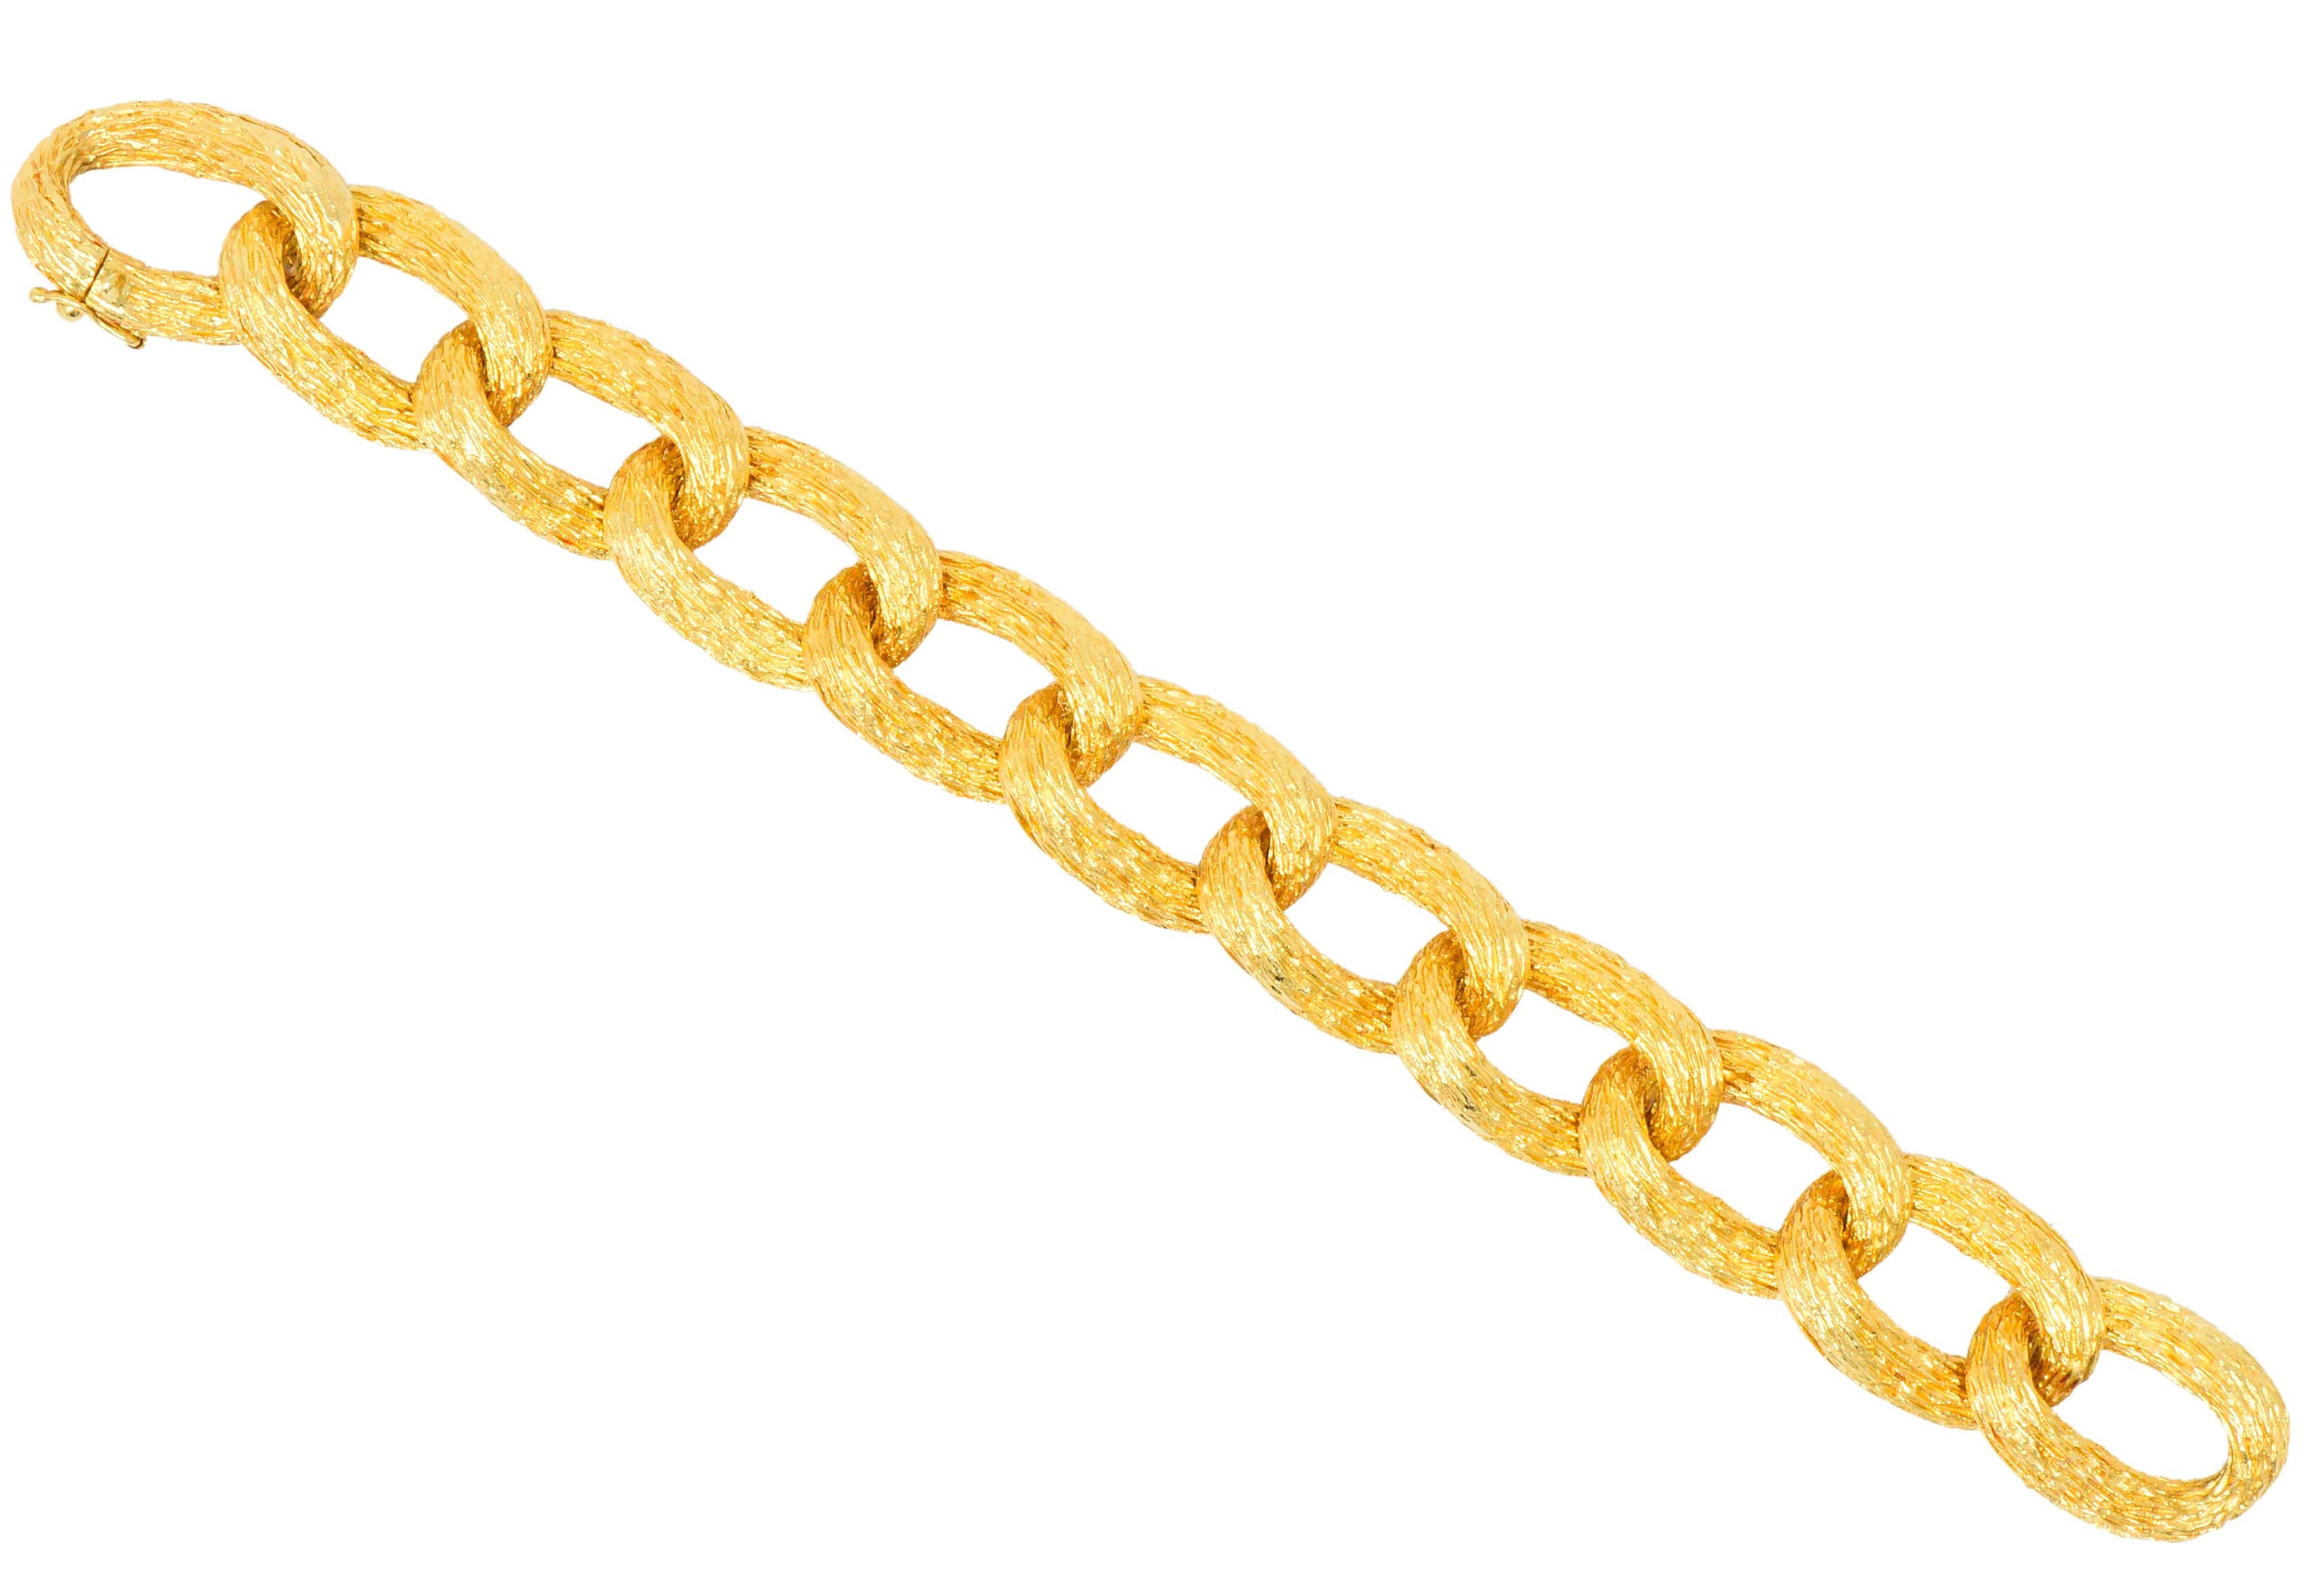 Large textured gold curb style links

Completed by a concealed clasp with figure-eight safety

Maker's mark for H. Stern

Circa 1970's

Length: 8 1/4 Inches

Width: 3/4 Inch

Total Weight: 78.4 Grams

Chic. Bold. Stylish.      
 

Stock Number: We-